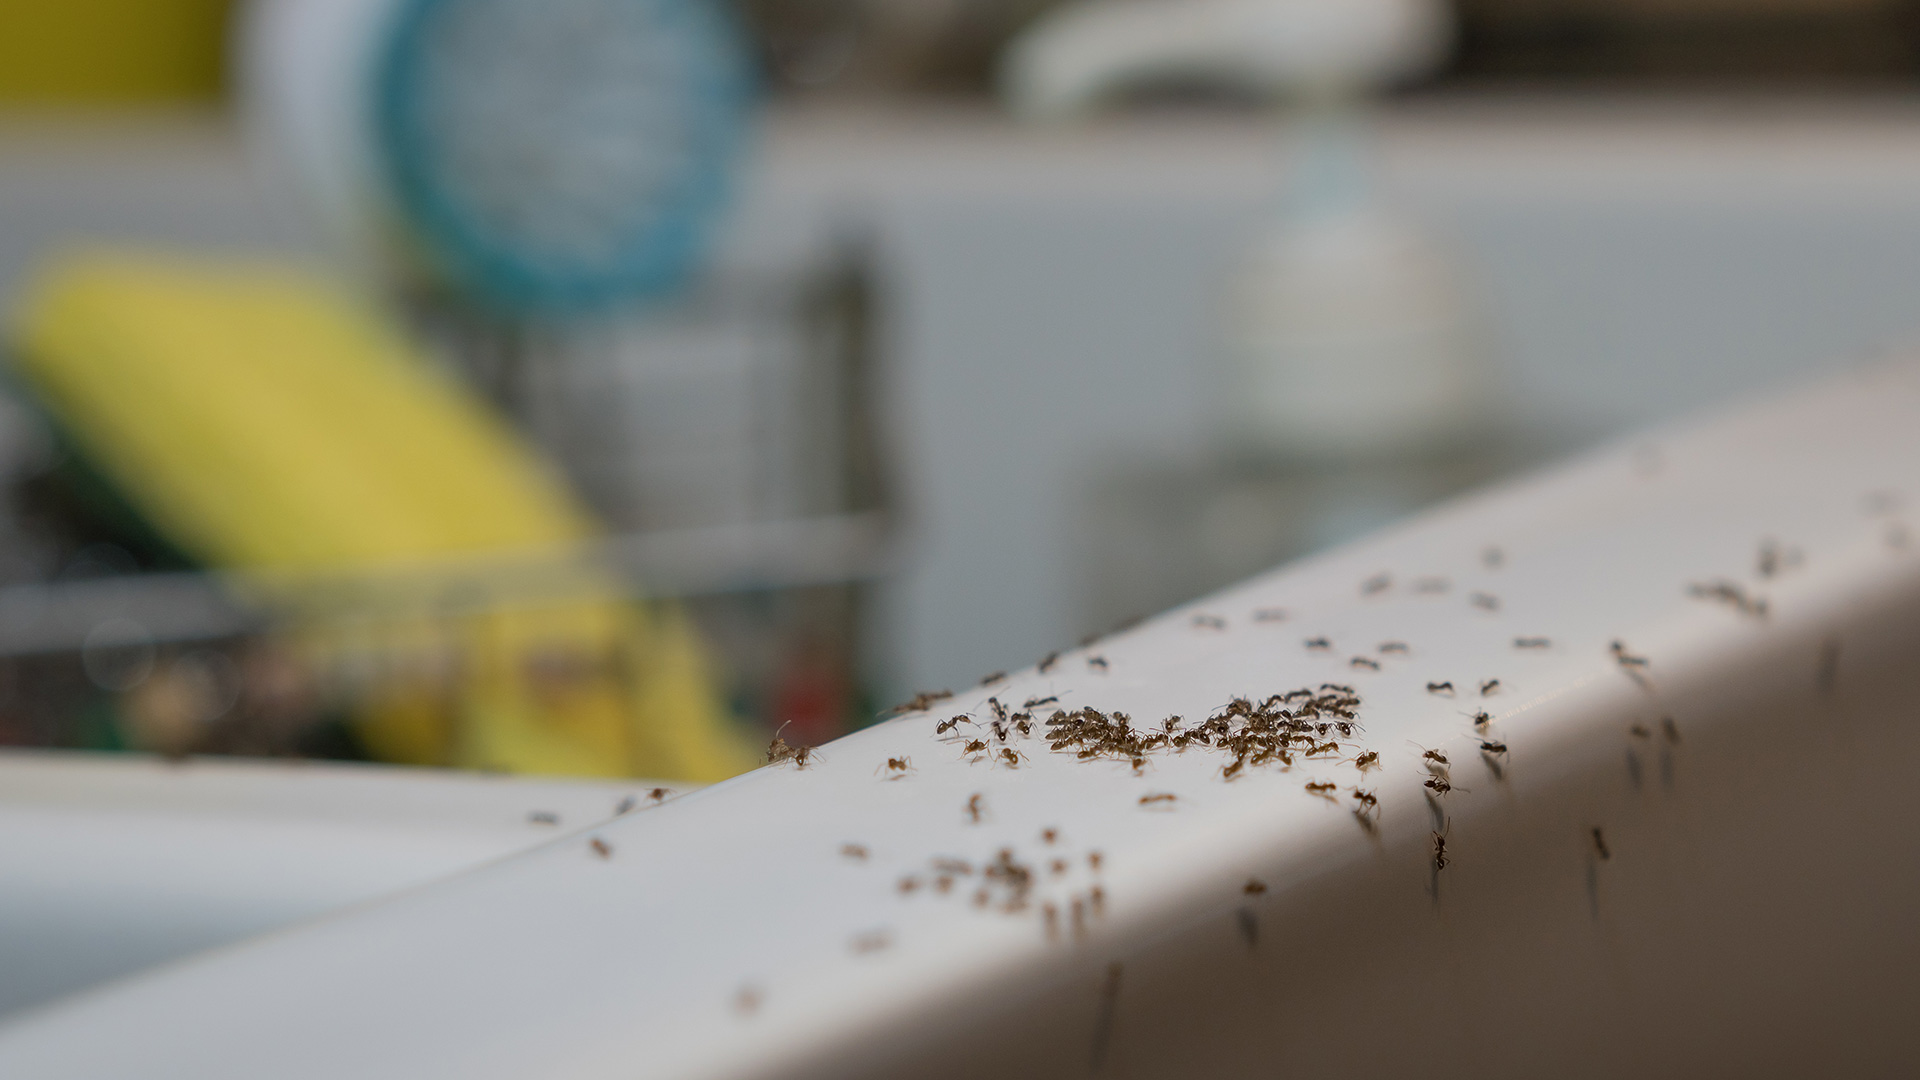 Insects Are Sneaking Into Your Home Through These 4 Spots